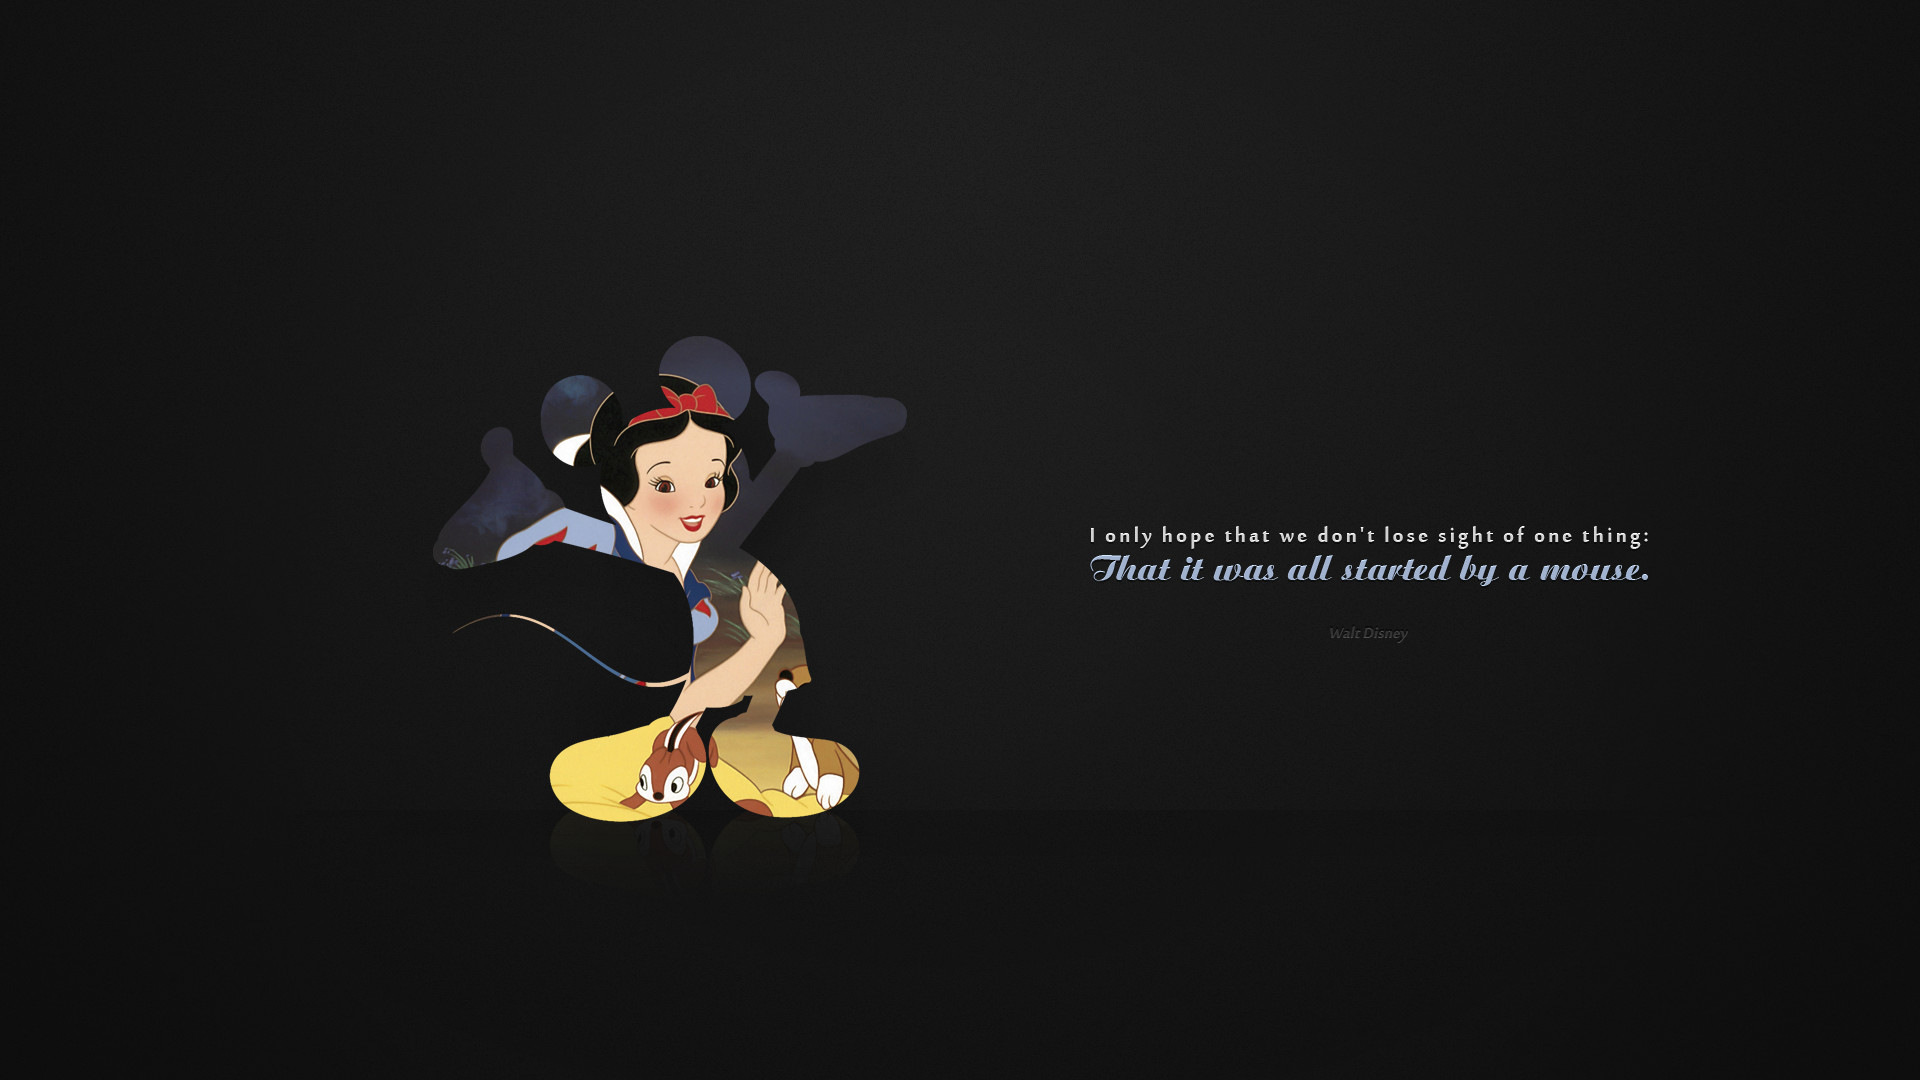 1920x1080 Disney Quotes Desktop Wallpaper. QuotesGram 0 HTML code. Some time ago, I  discovered a wallpaper that apparently never got .